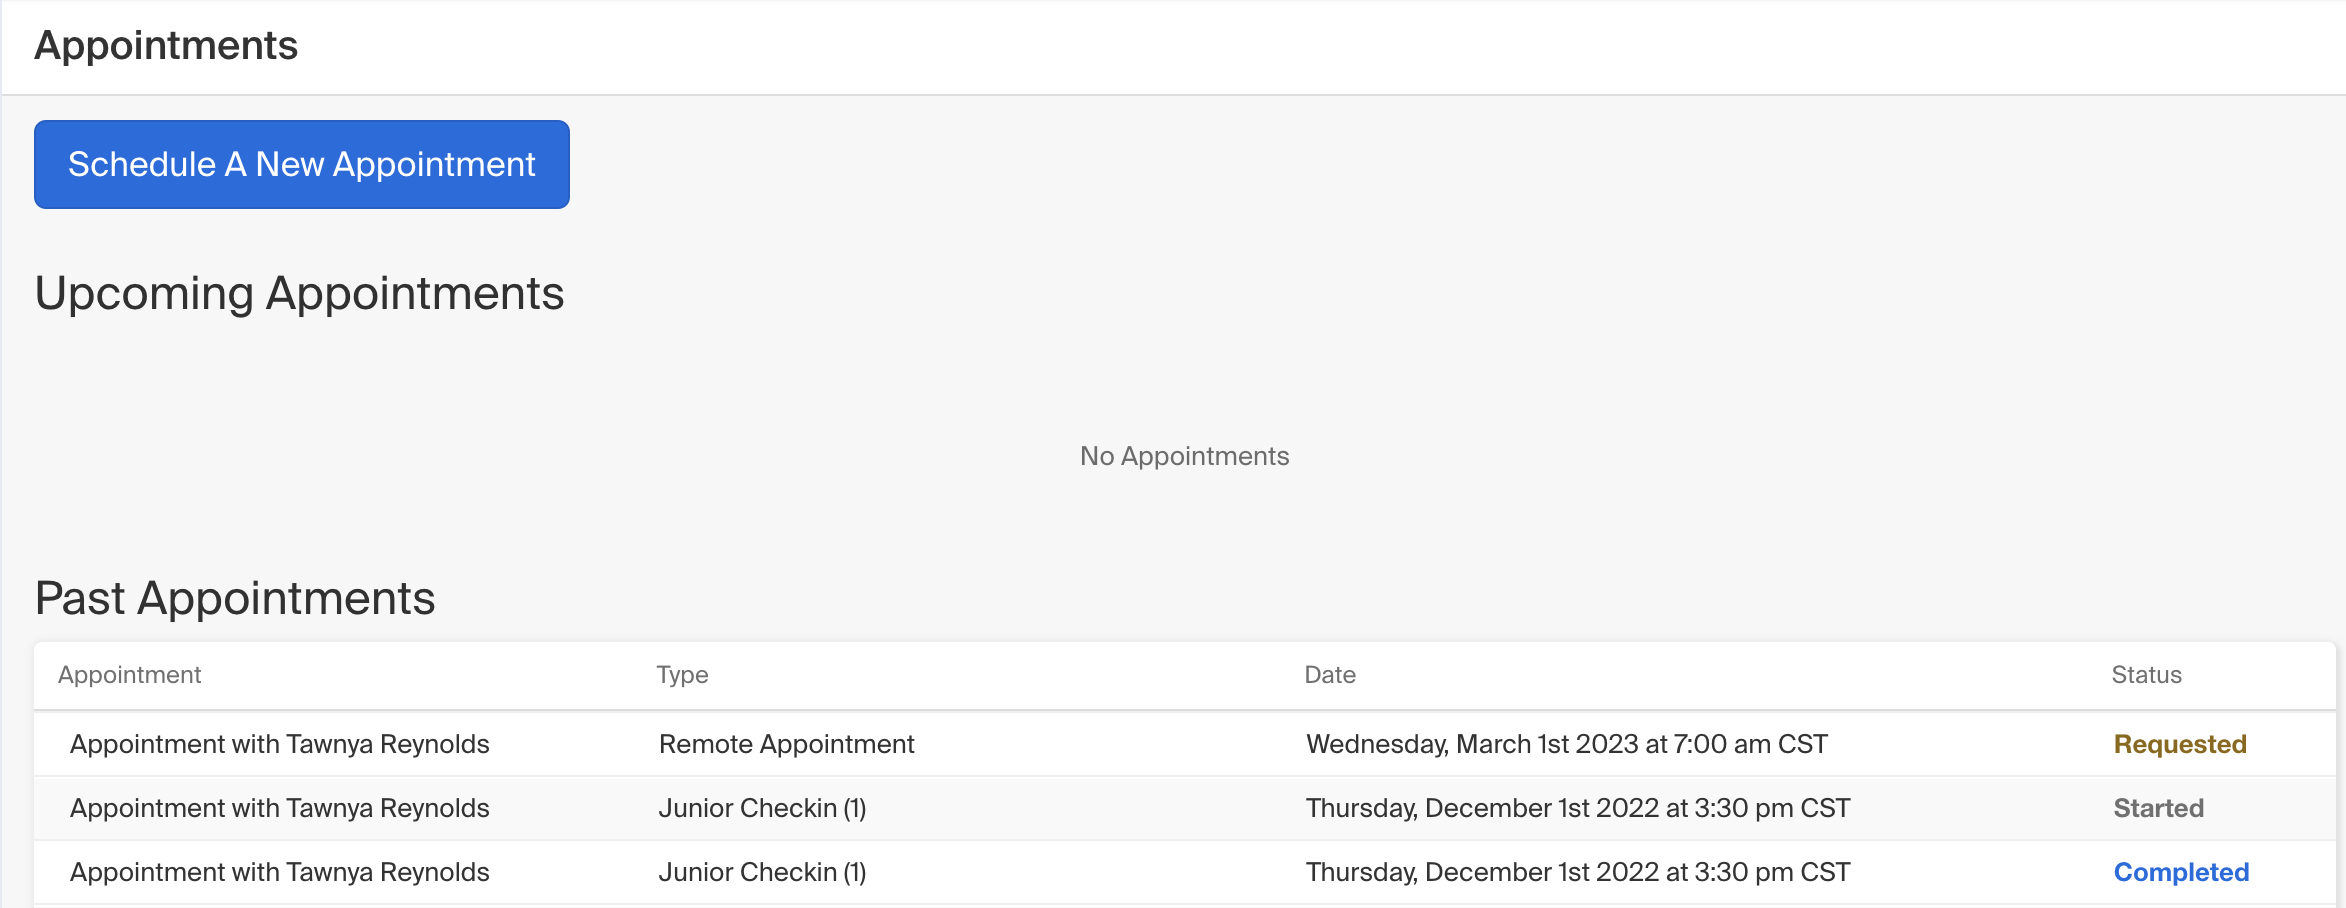 Schedule_A_New_Appointment_Image.png